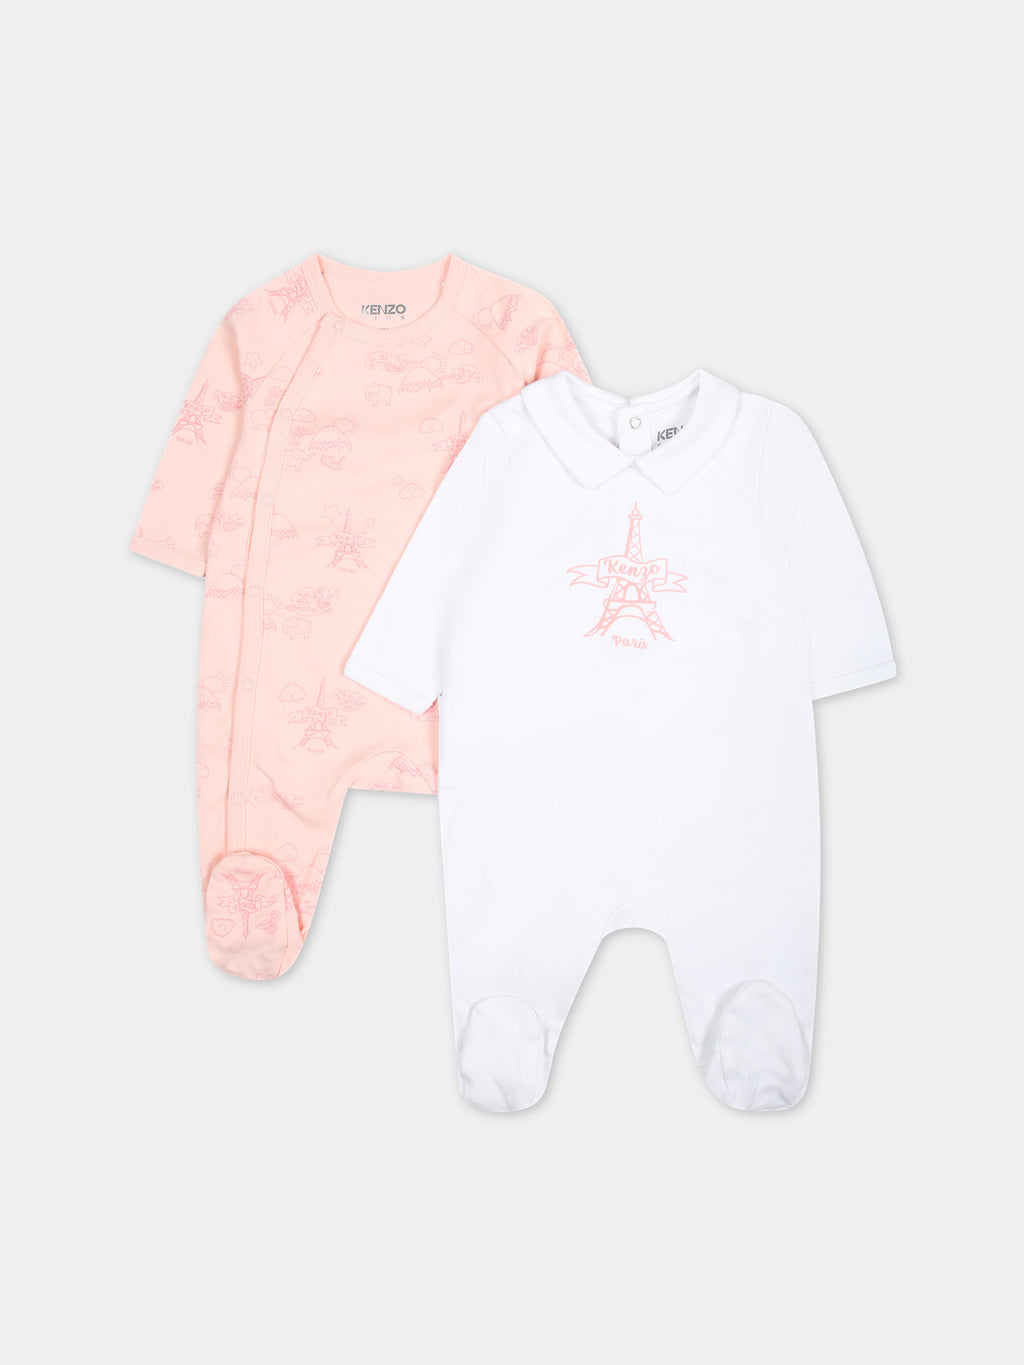 Pink set for baby girl with Tour Eiffel and print